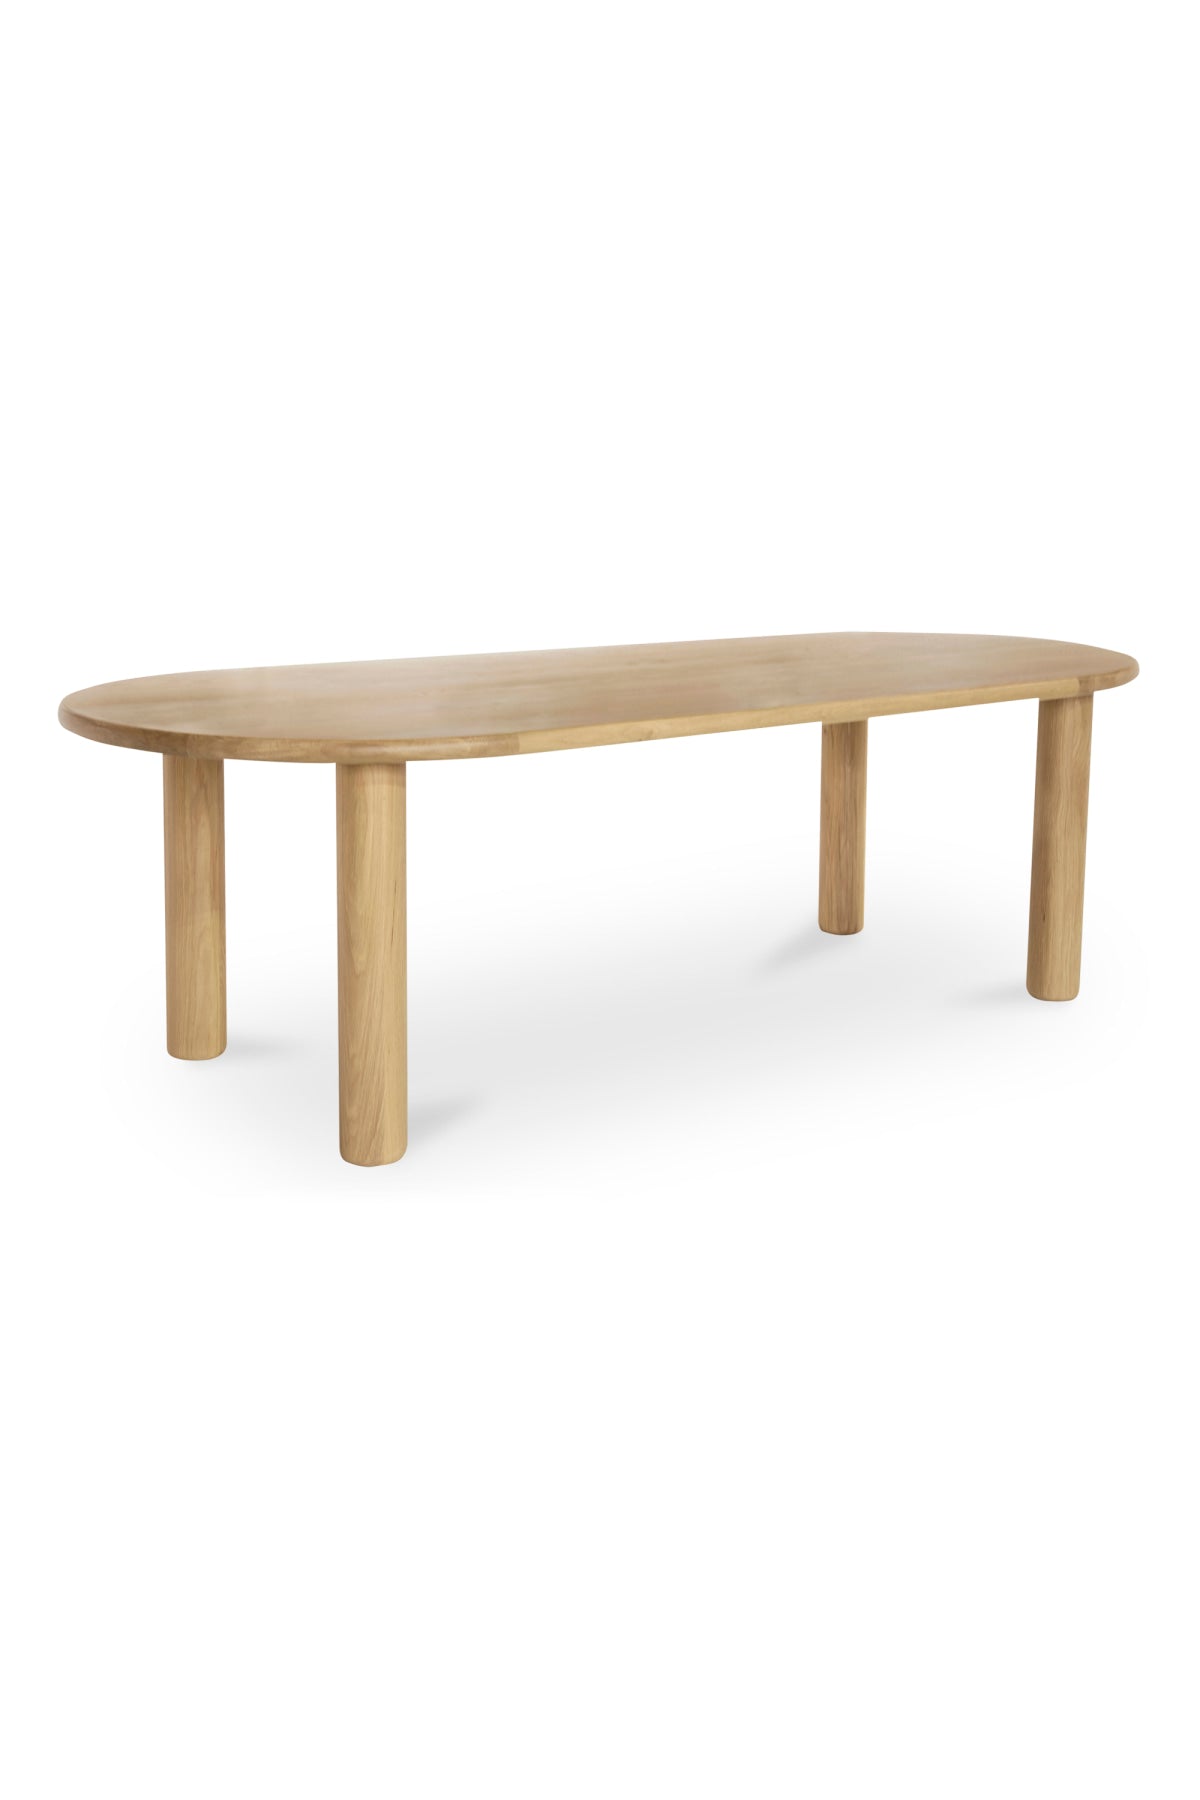 Dundee Dining Table - 2 Sizes